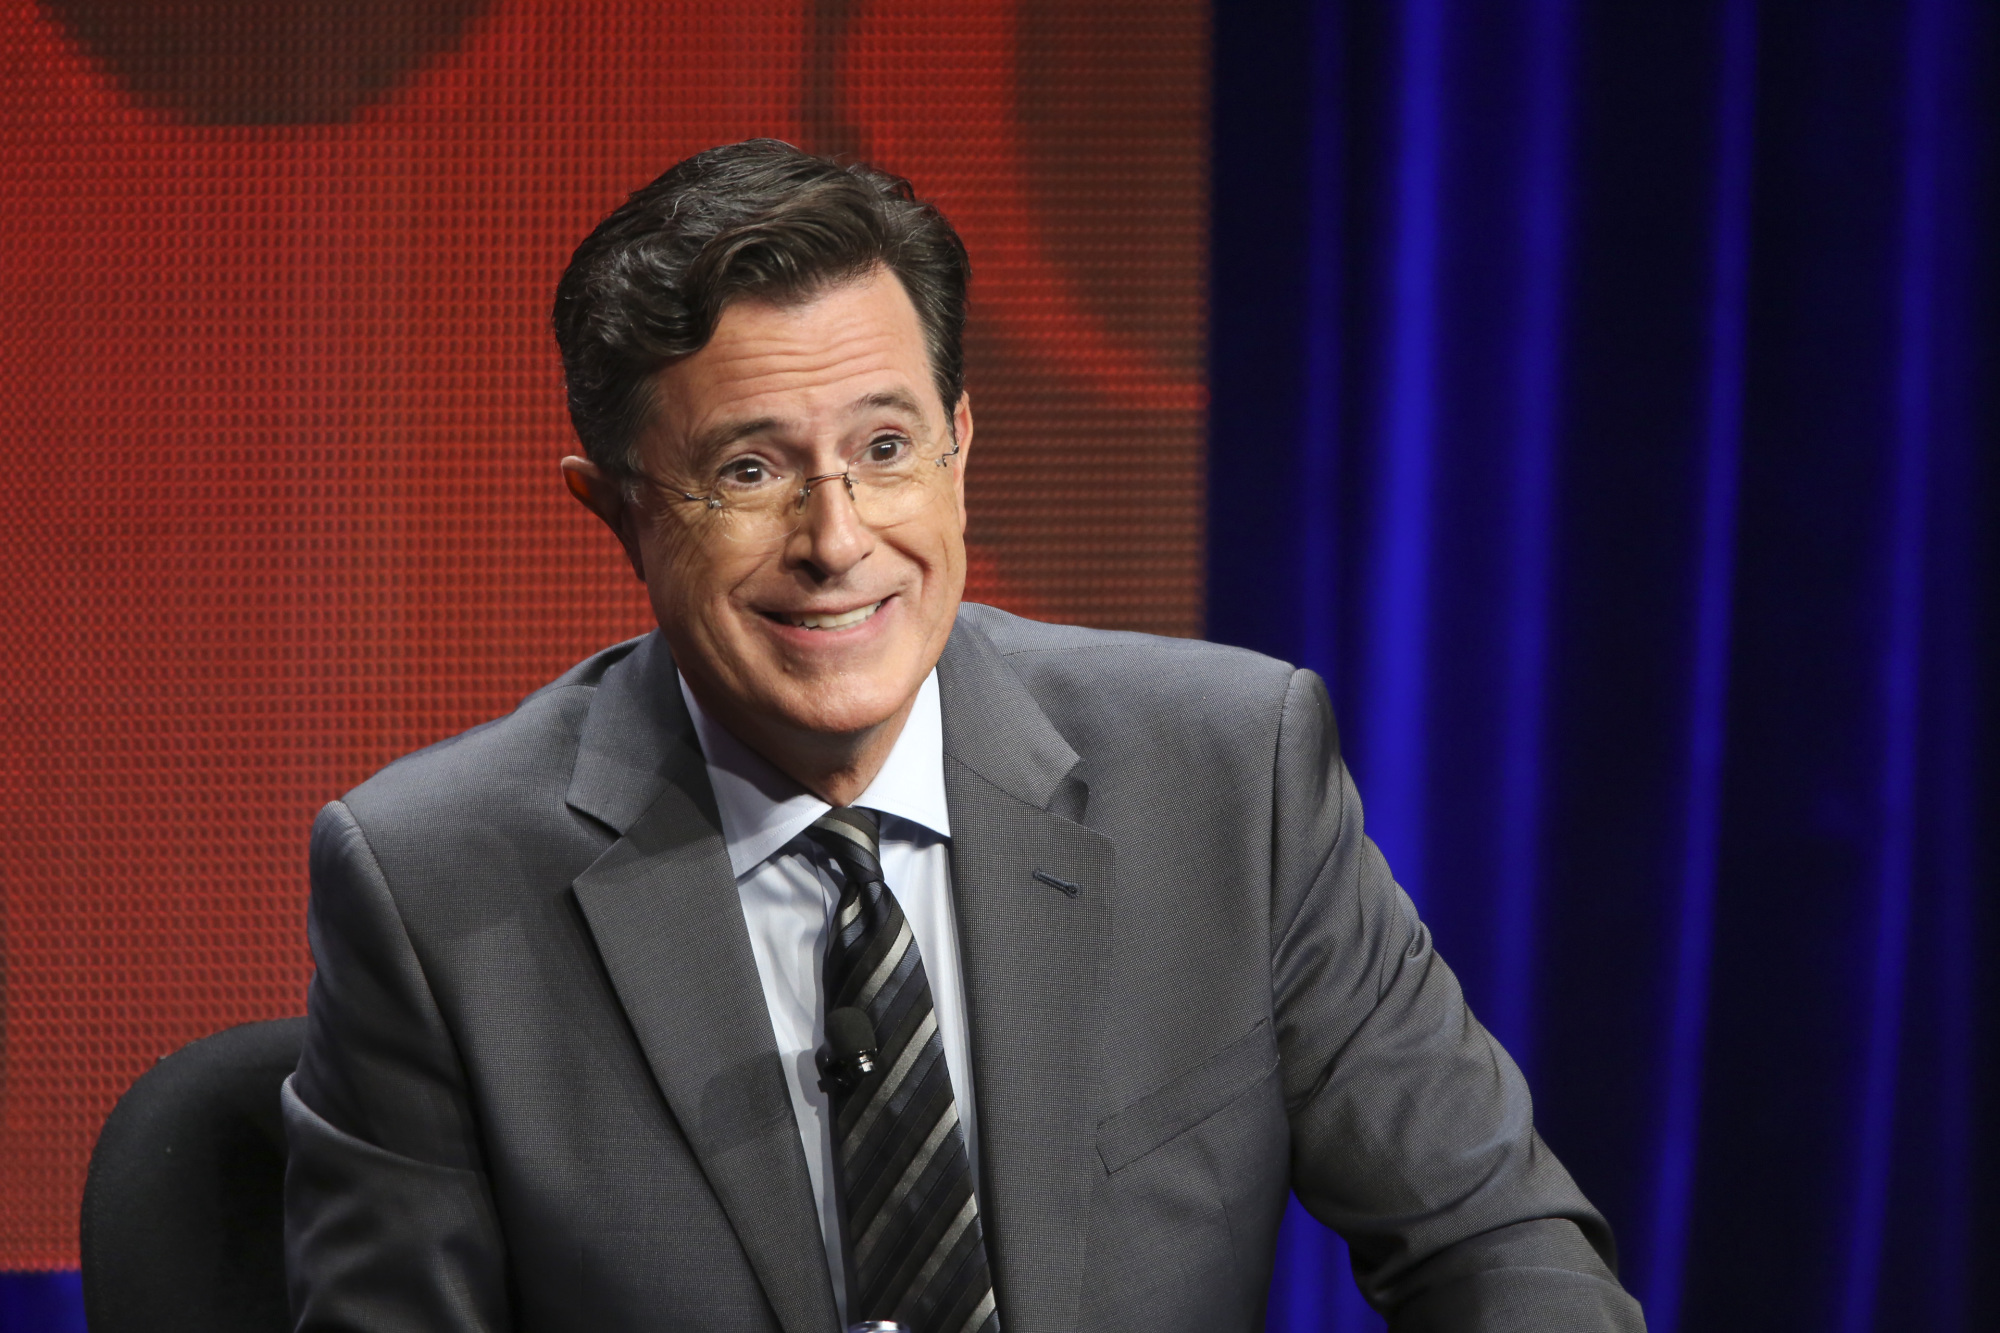 Stephen Colbert at the TCA Summer Press Tour 2015 in Los Angeles on Aug. 10, 2015.